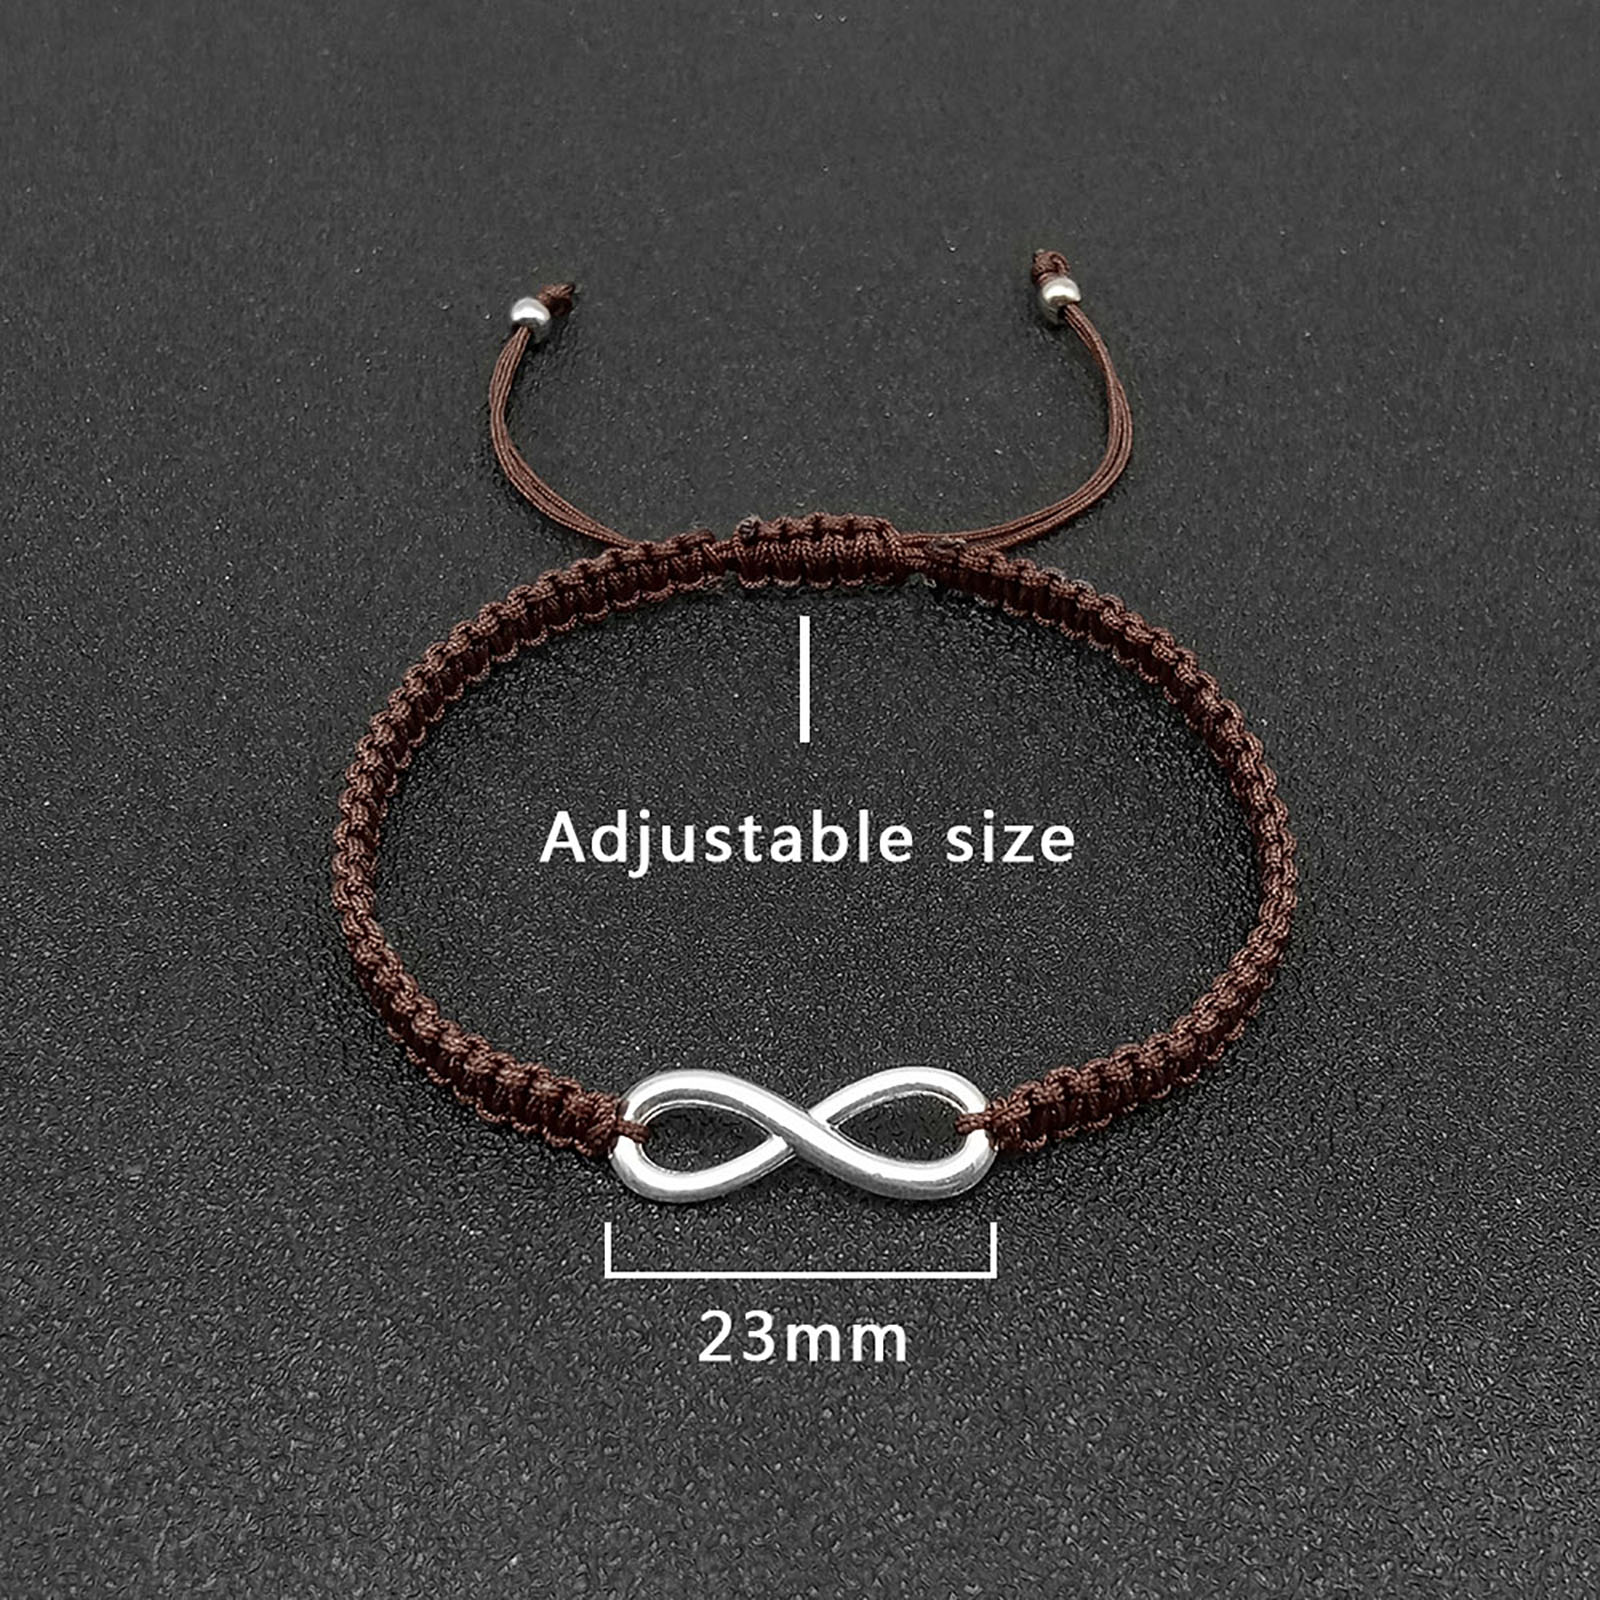 The symbol length is 23mm, and the size of the hand rope is adjustable